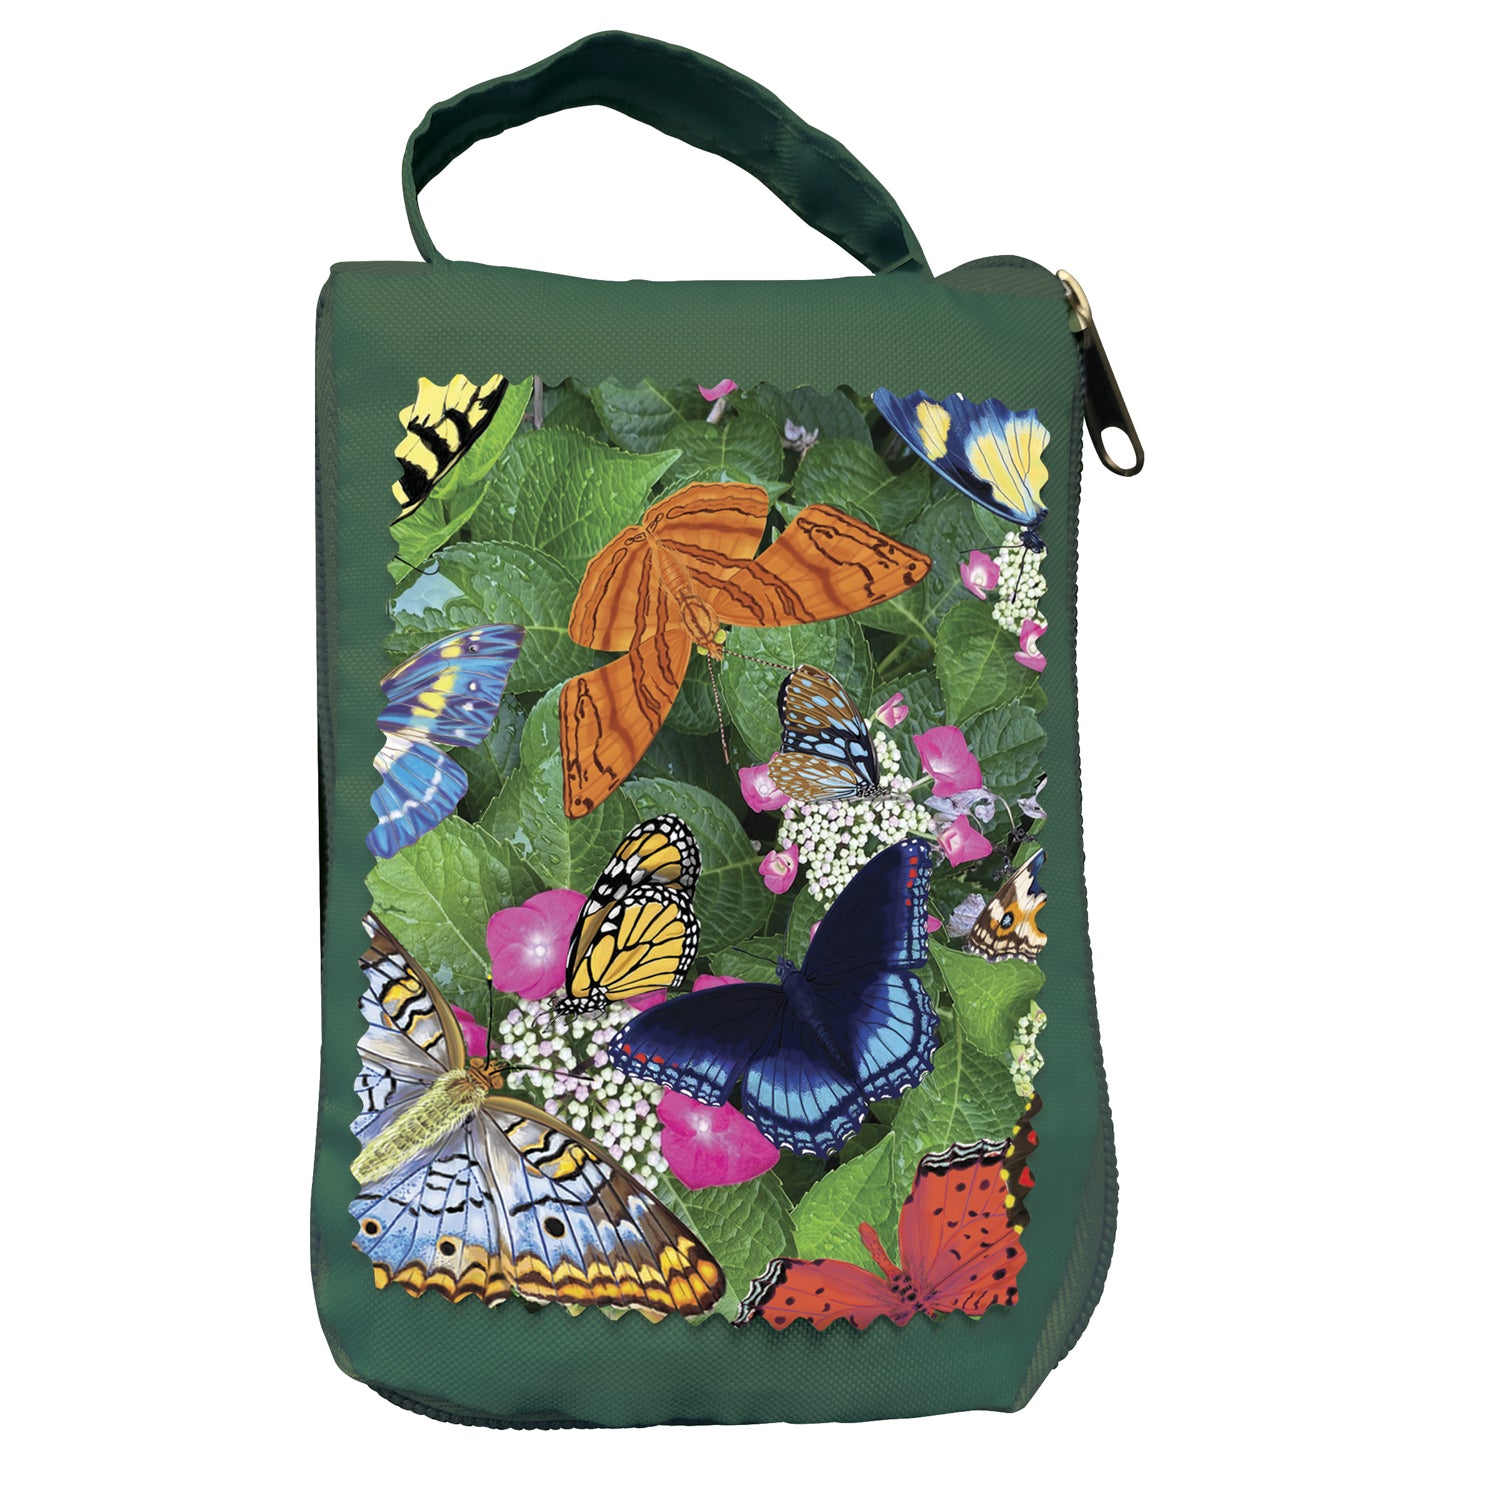 Butterflies Compact Tote Bag